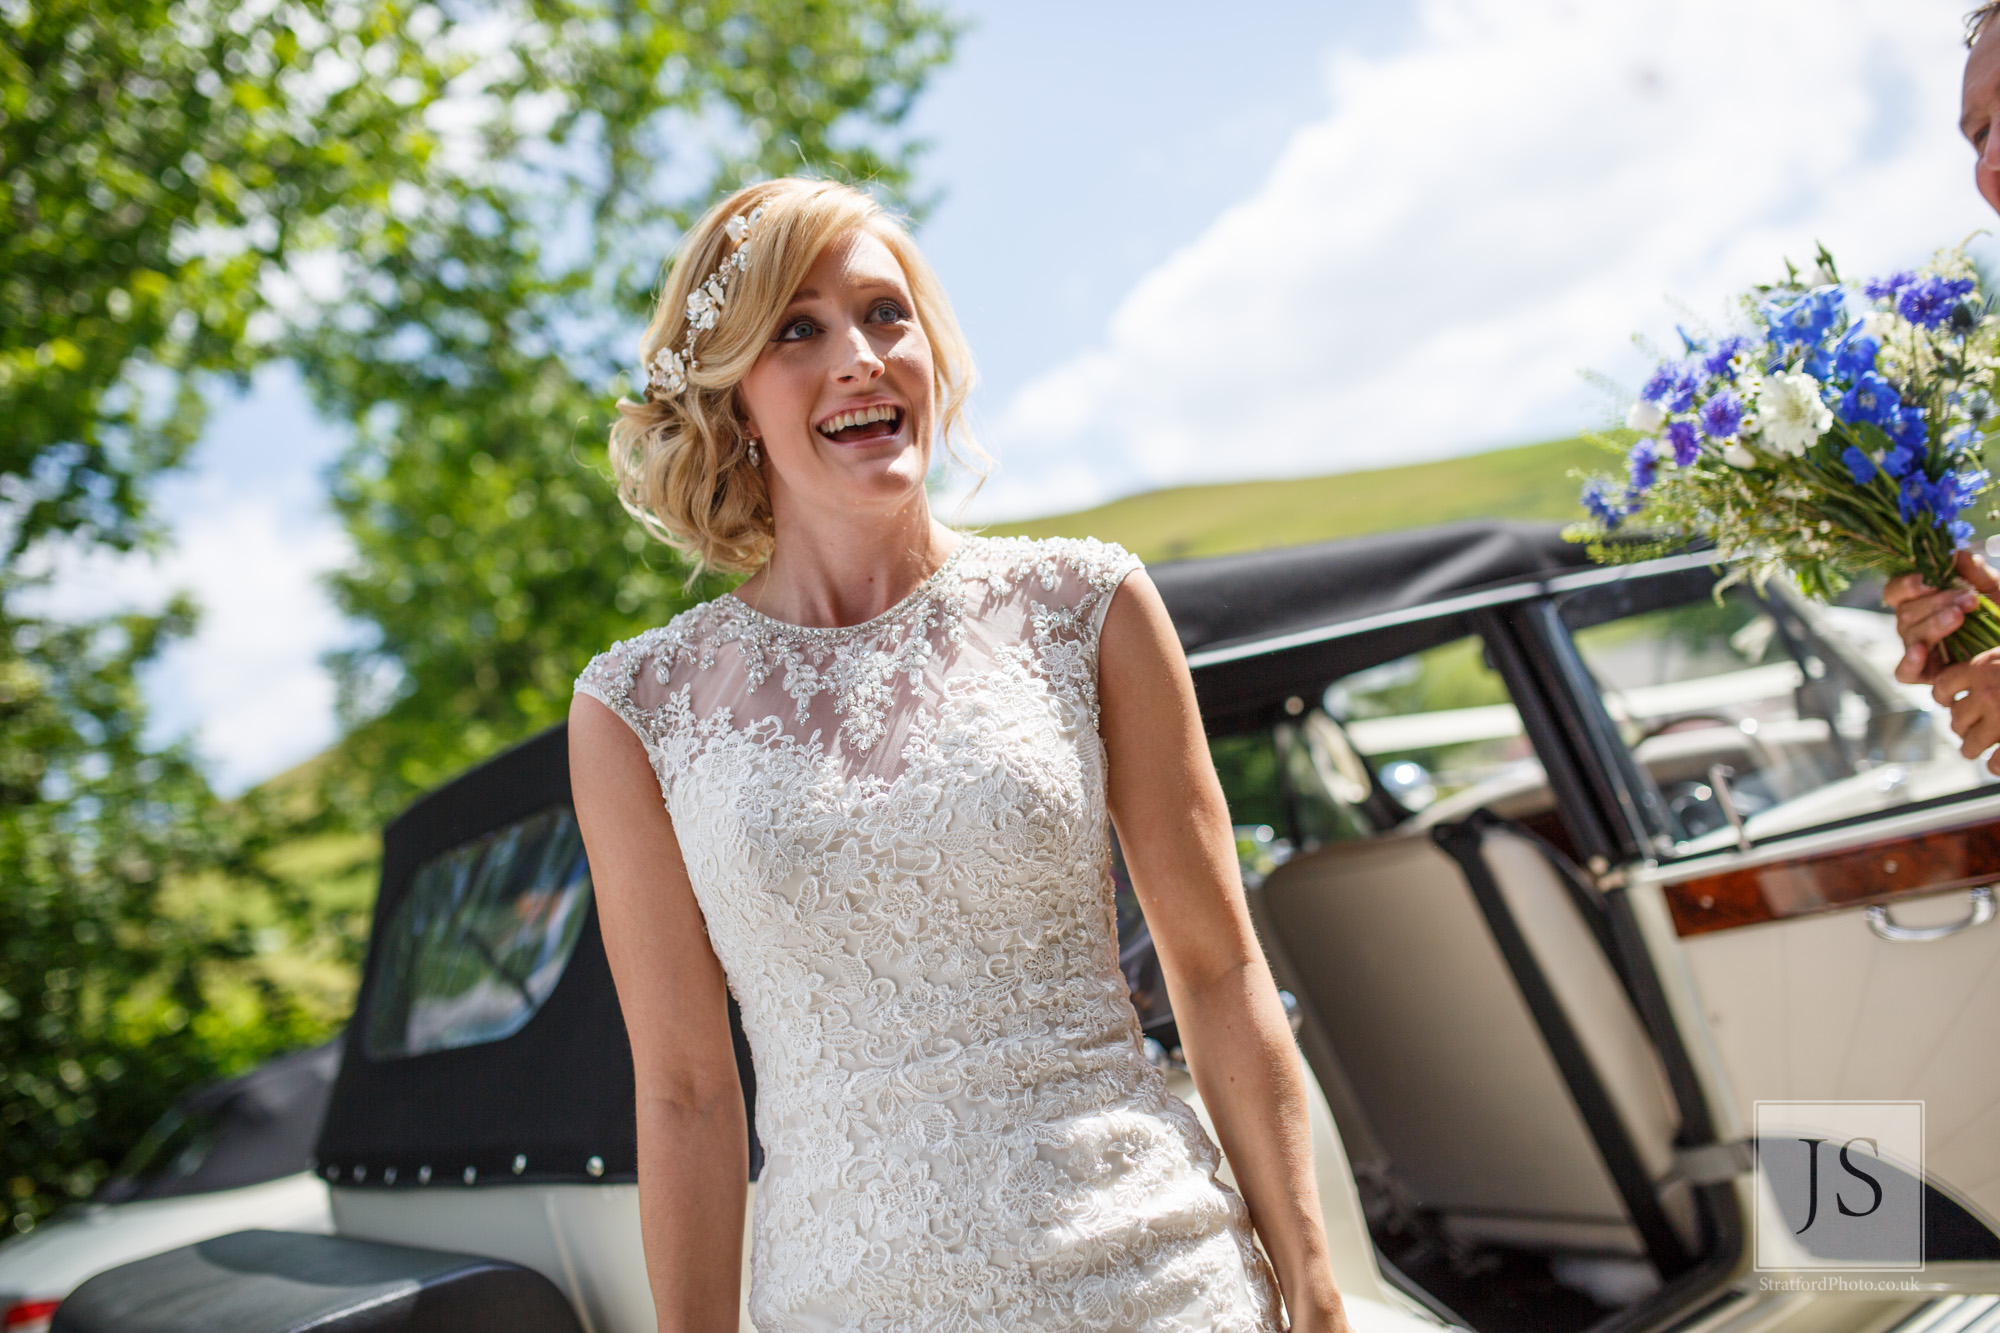 An excited brides gets out of her wedding car.jpg